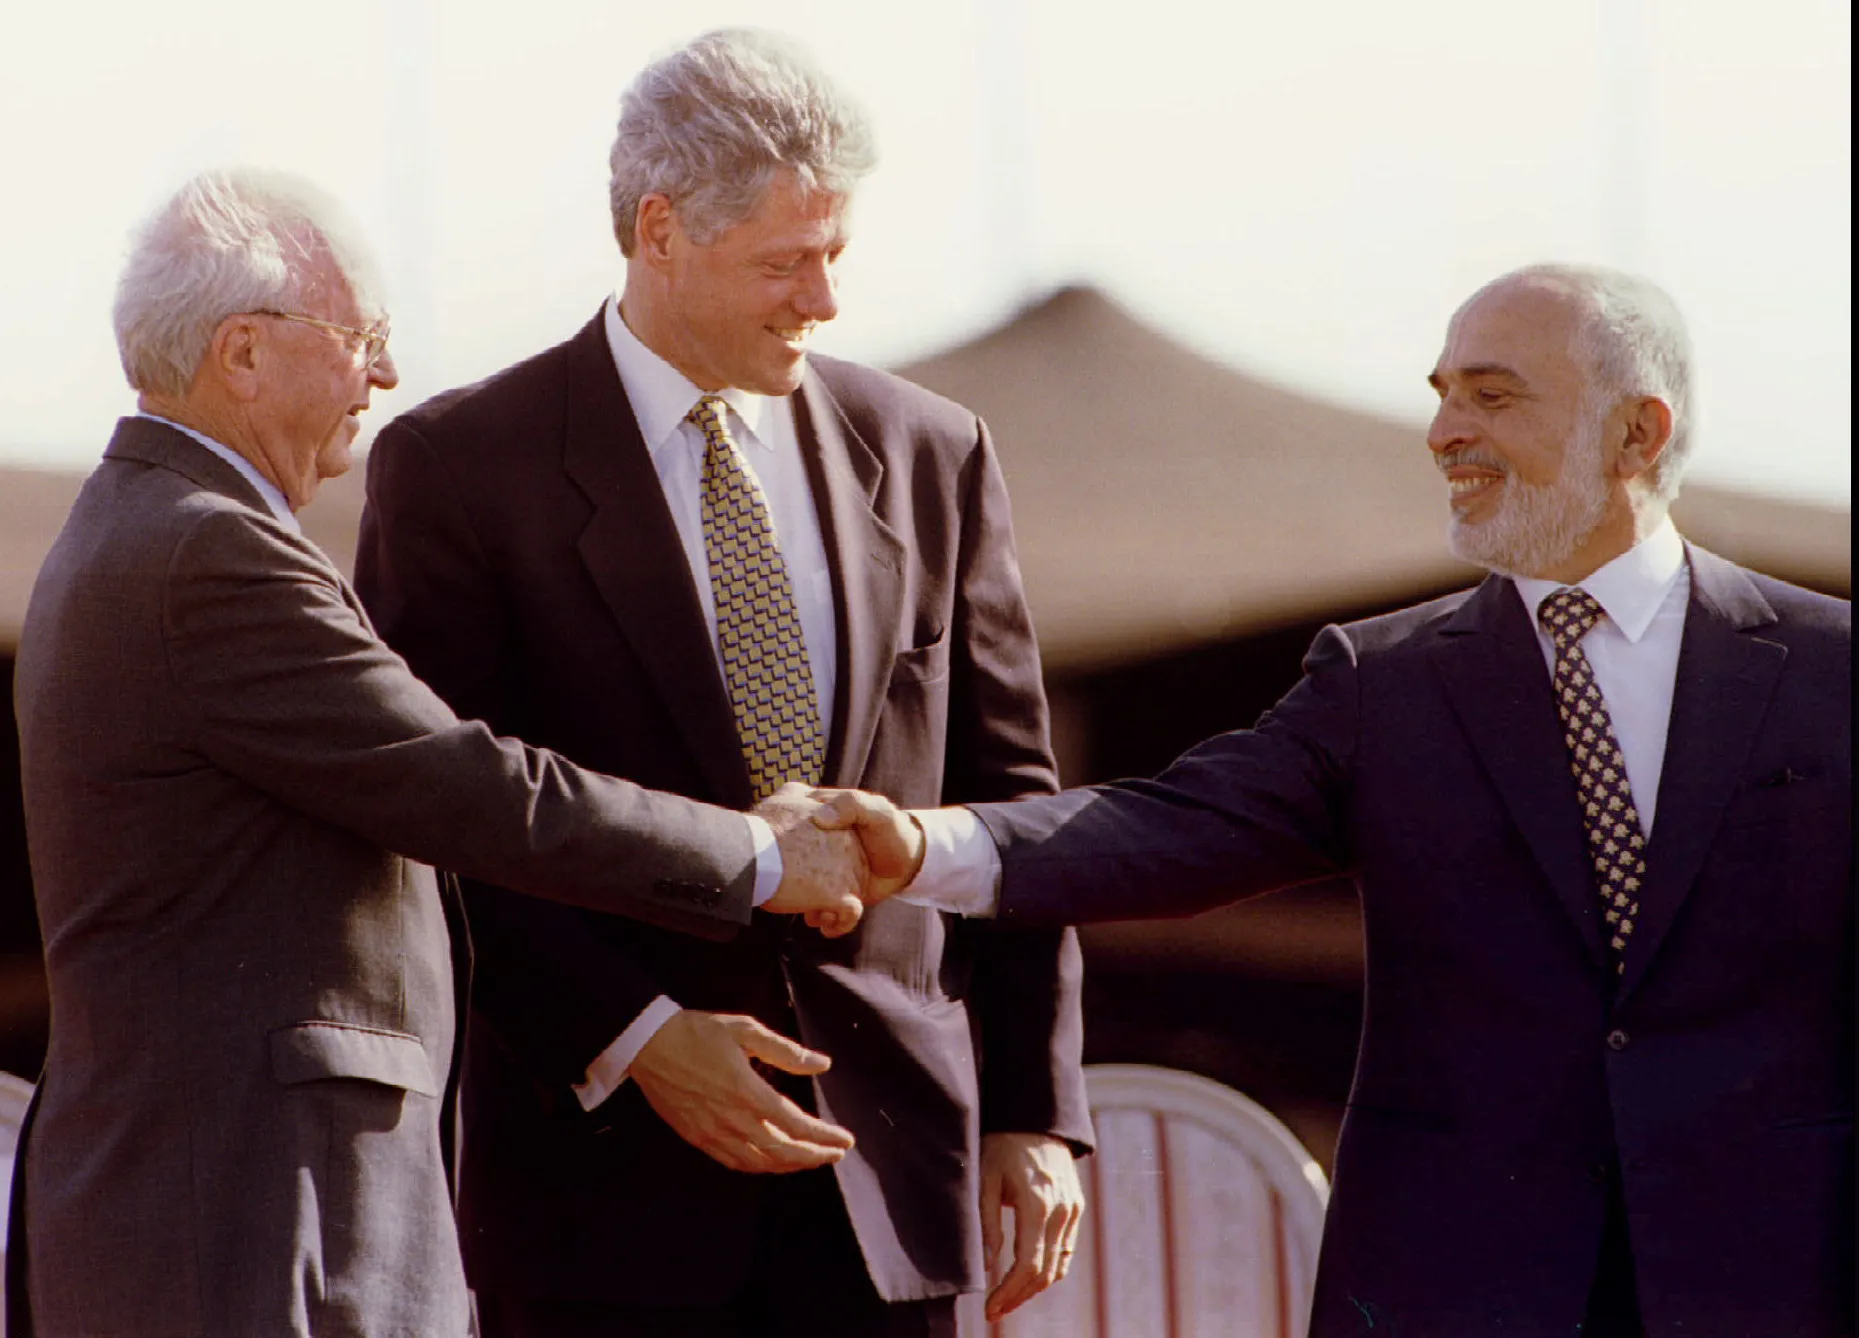 25 years on, remembering the path to peace for Jordan and Israel